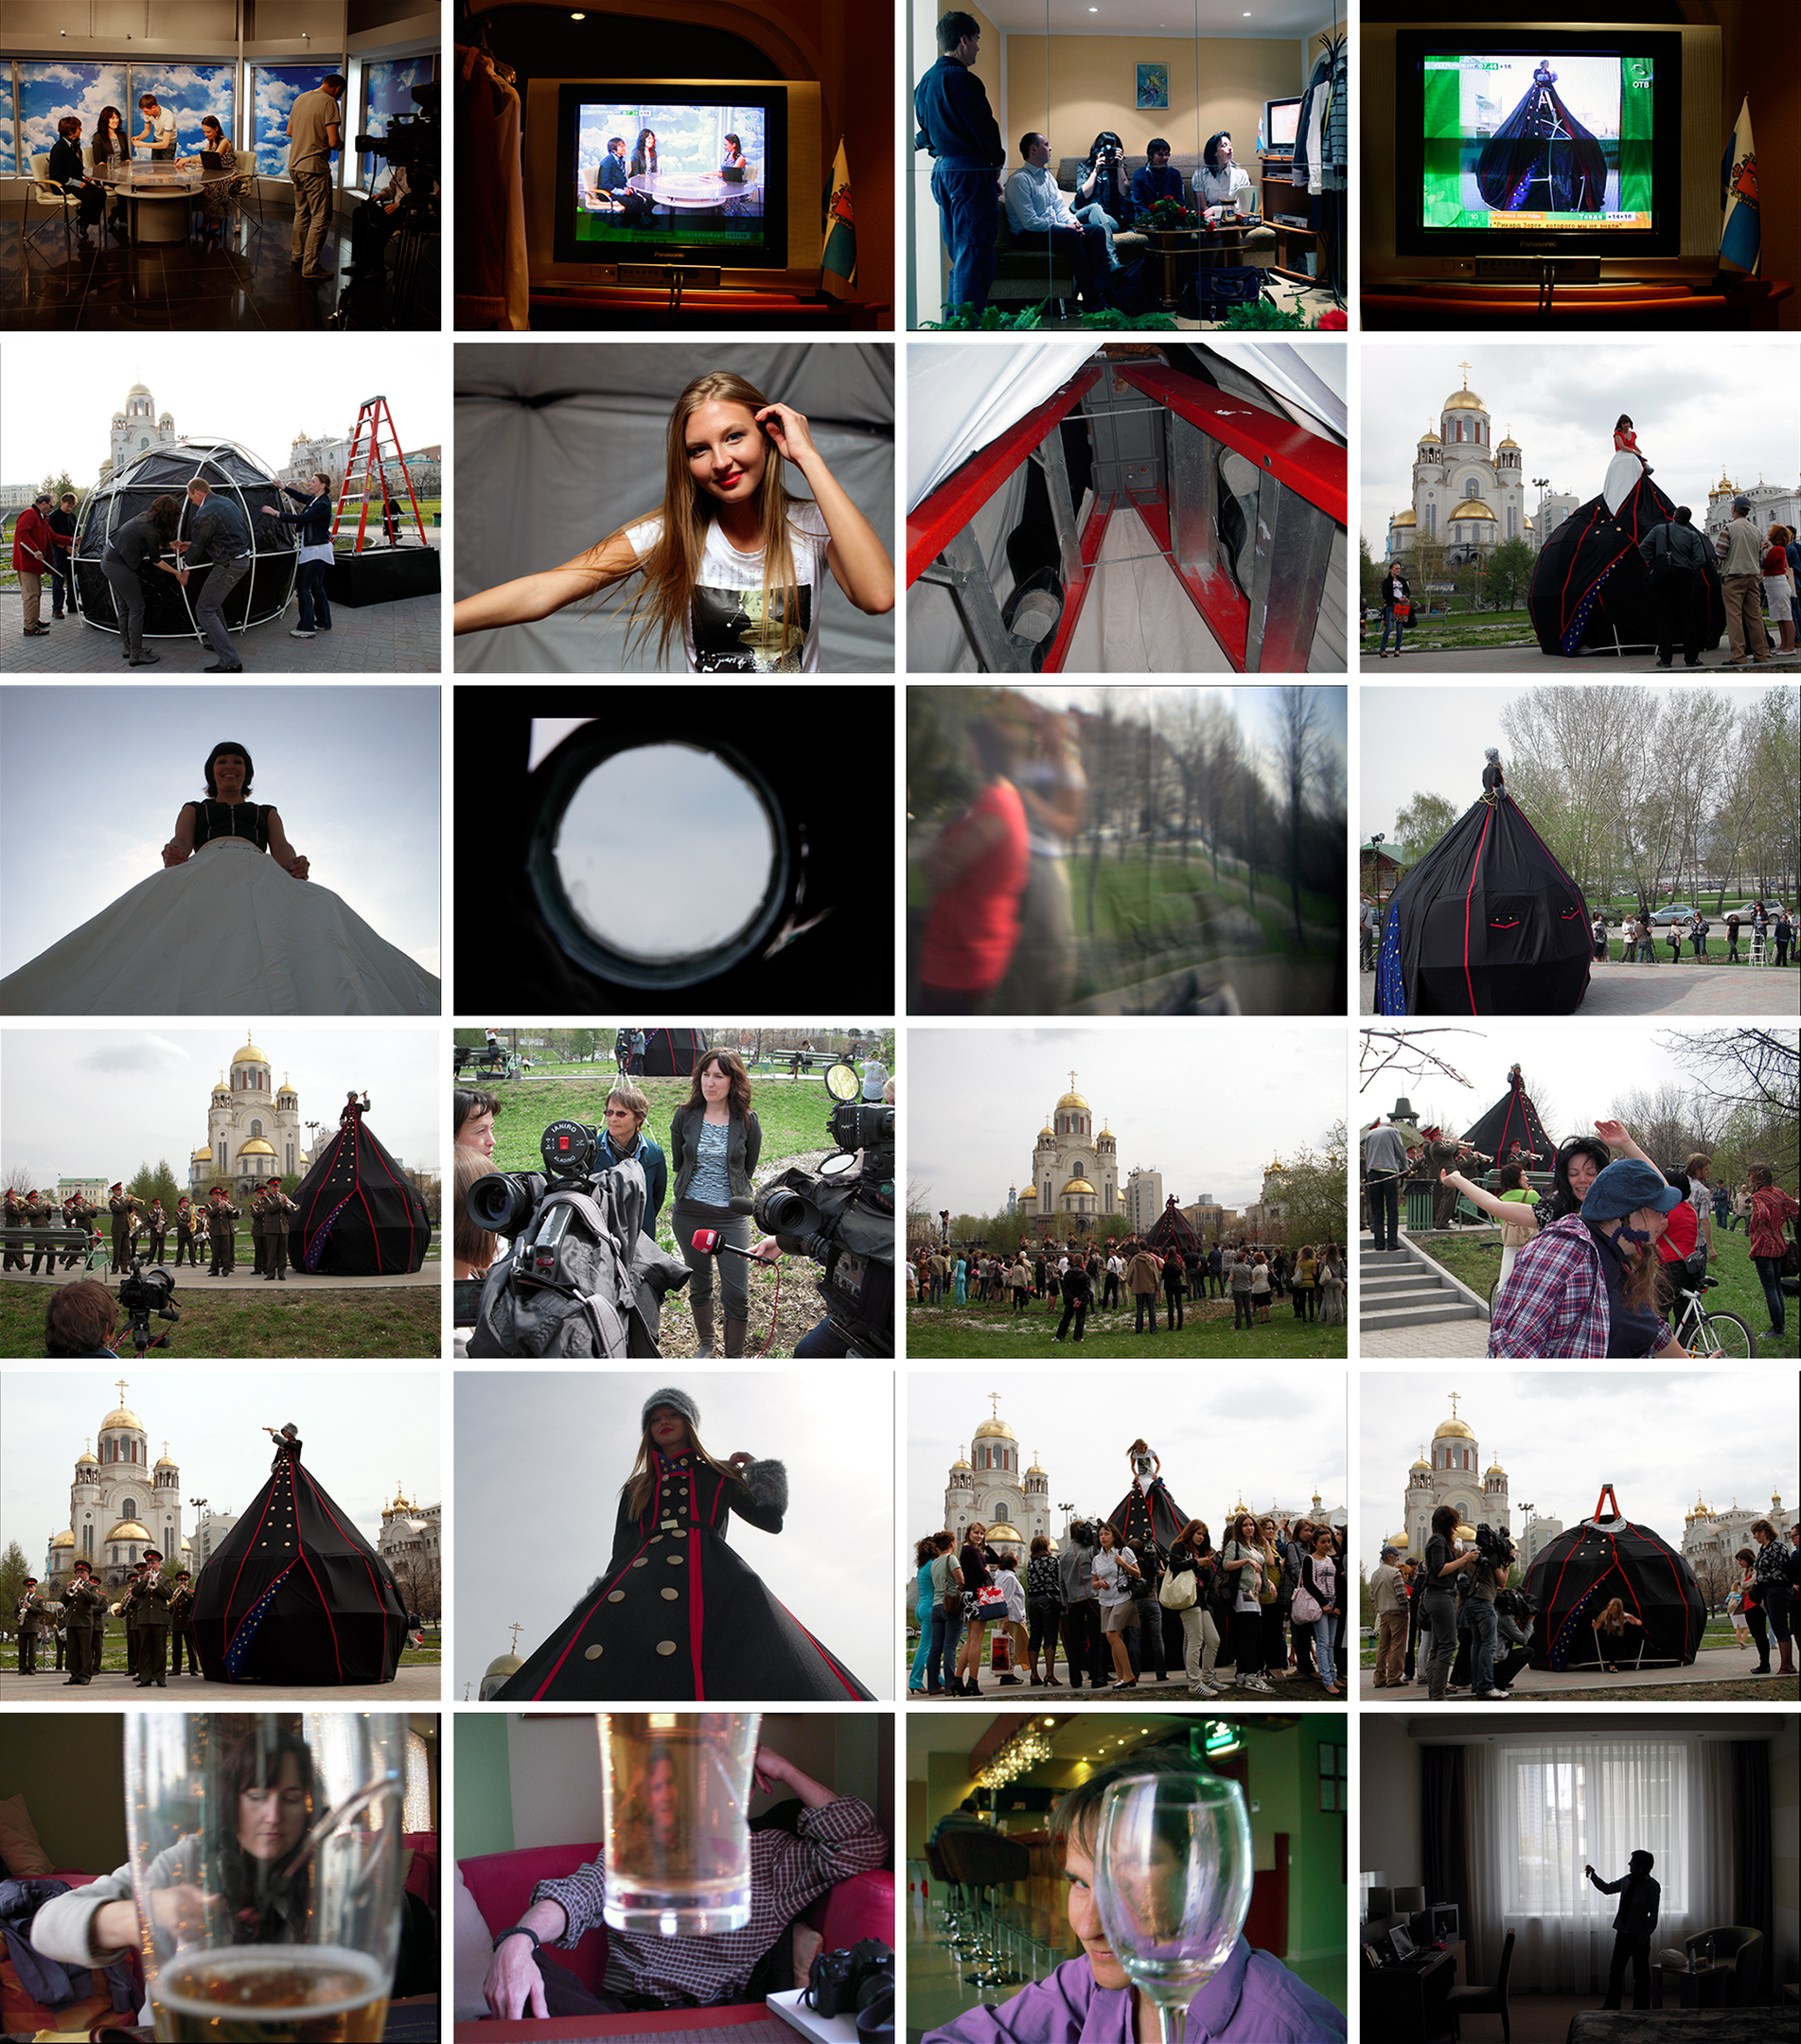   MS. RUSSIA: CAMERA OBSCURA DRESS TENT INSTALLATION  Church on the Blood,&nbsp;Yekaterinburg, Russia   